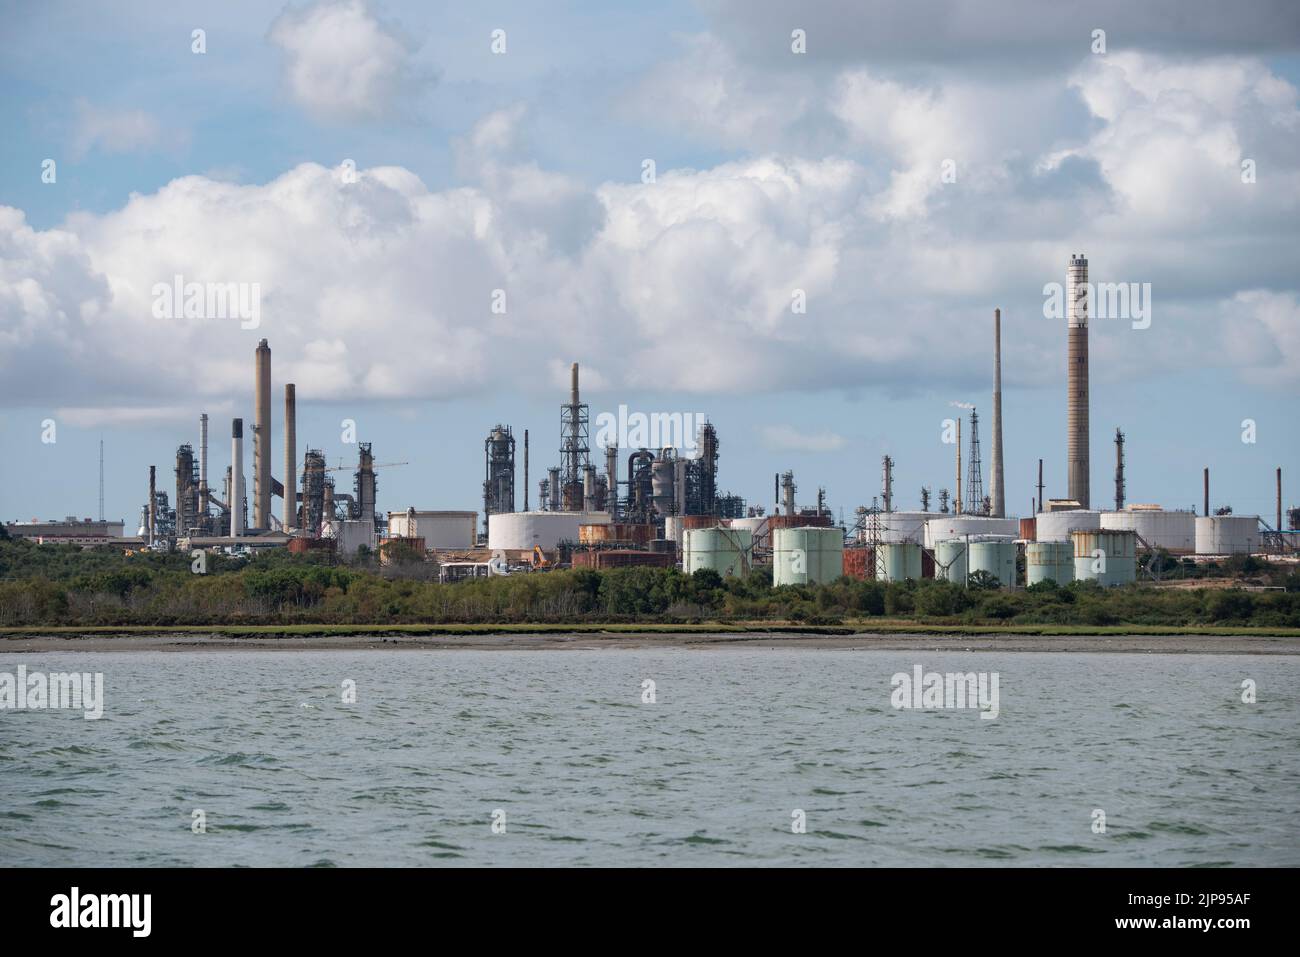 The huge oil refining and petroleum storage complex at Fawley sits close to Southampton Water on the South coast of England Stock Photo